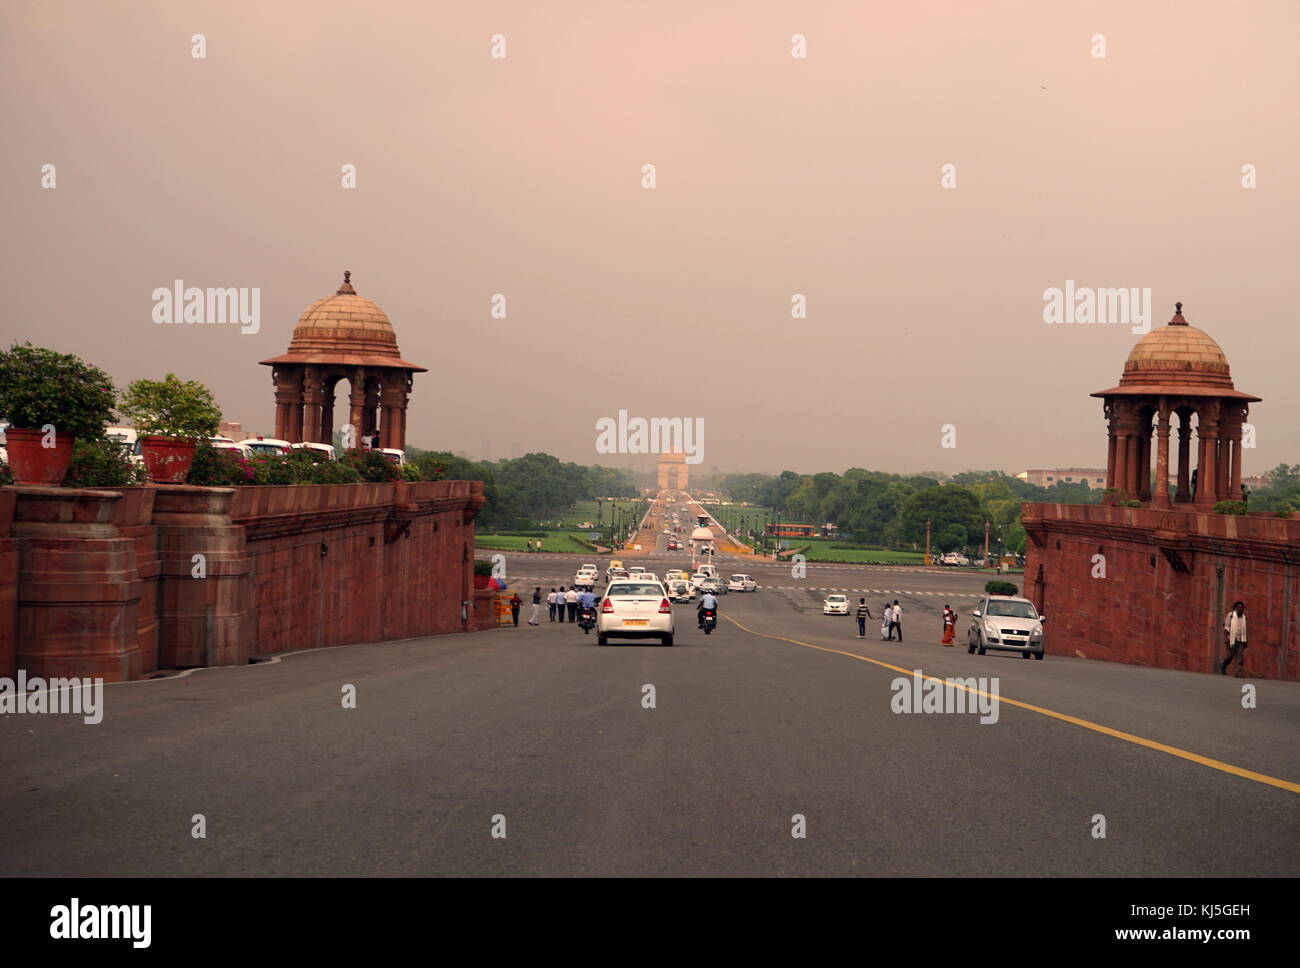 View from Rajpath Marg to India Gate, Delhi India. Rajpath (meaning 'King's Way') is a ceremonial boulevard in New Delhi, India, that runs from Rashtrapati Bhavan on Raisina Hill through Vijay Chowk and India Gate to the National Stadium. The avenue is lined on both sides by huge lawns, canals and rows of trees. It was designed by Edward Lutyens Stock Photo